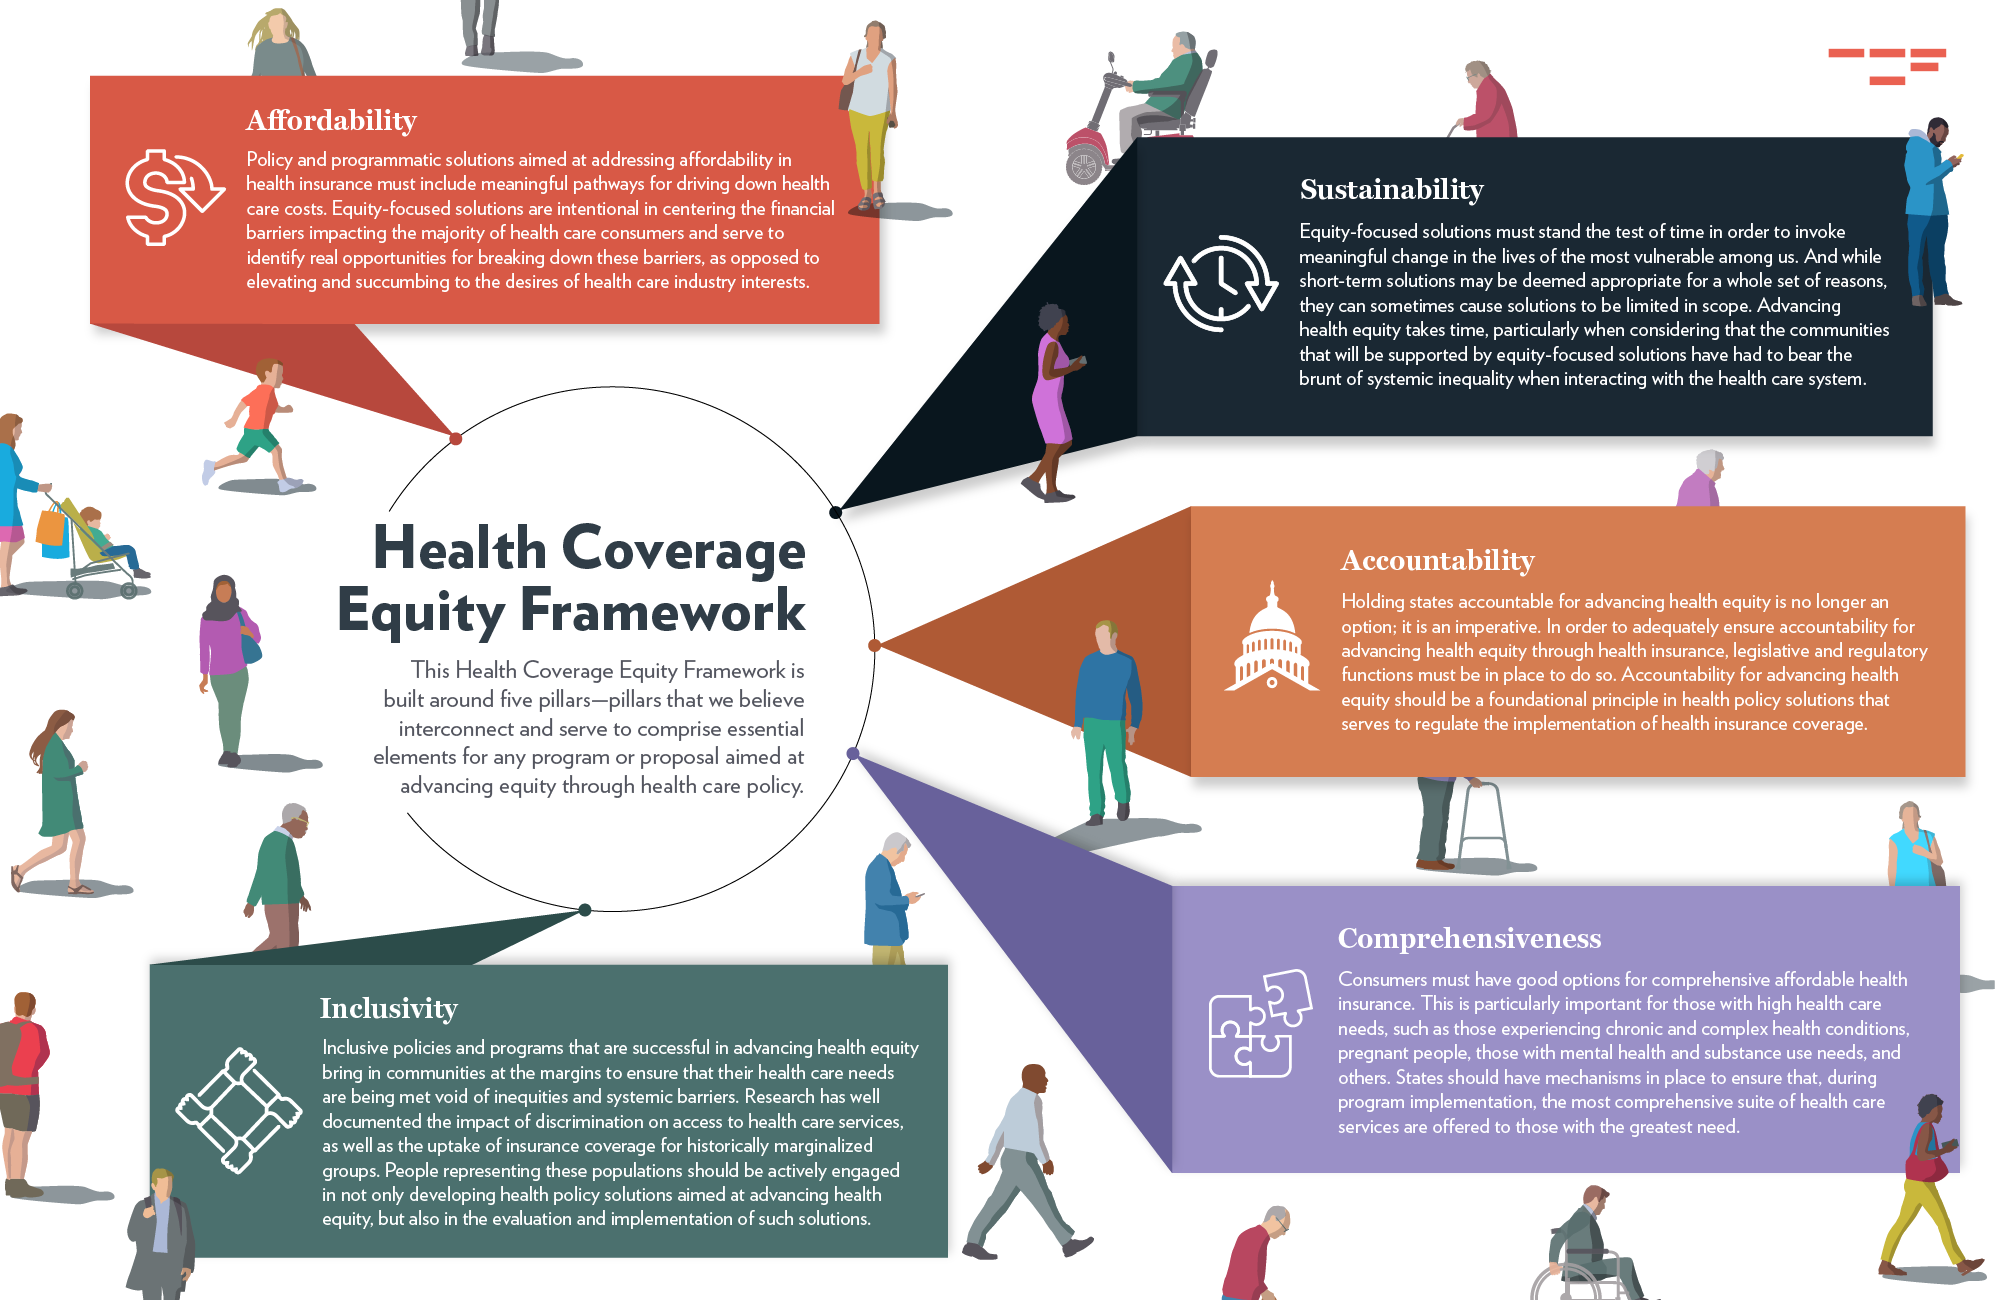 A condensed, one-page version of the full Health Coverage Equity Framework tool.